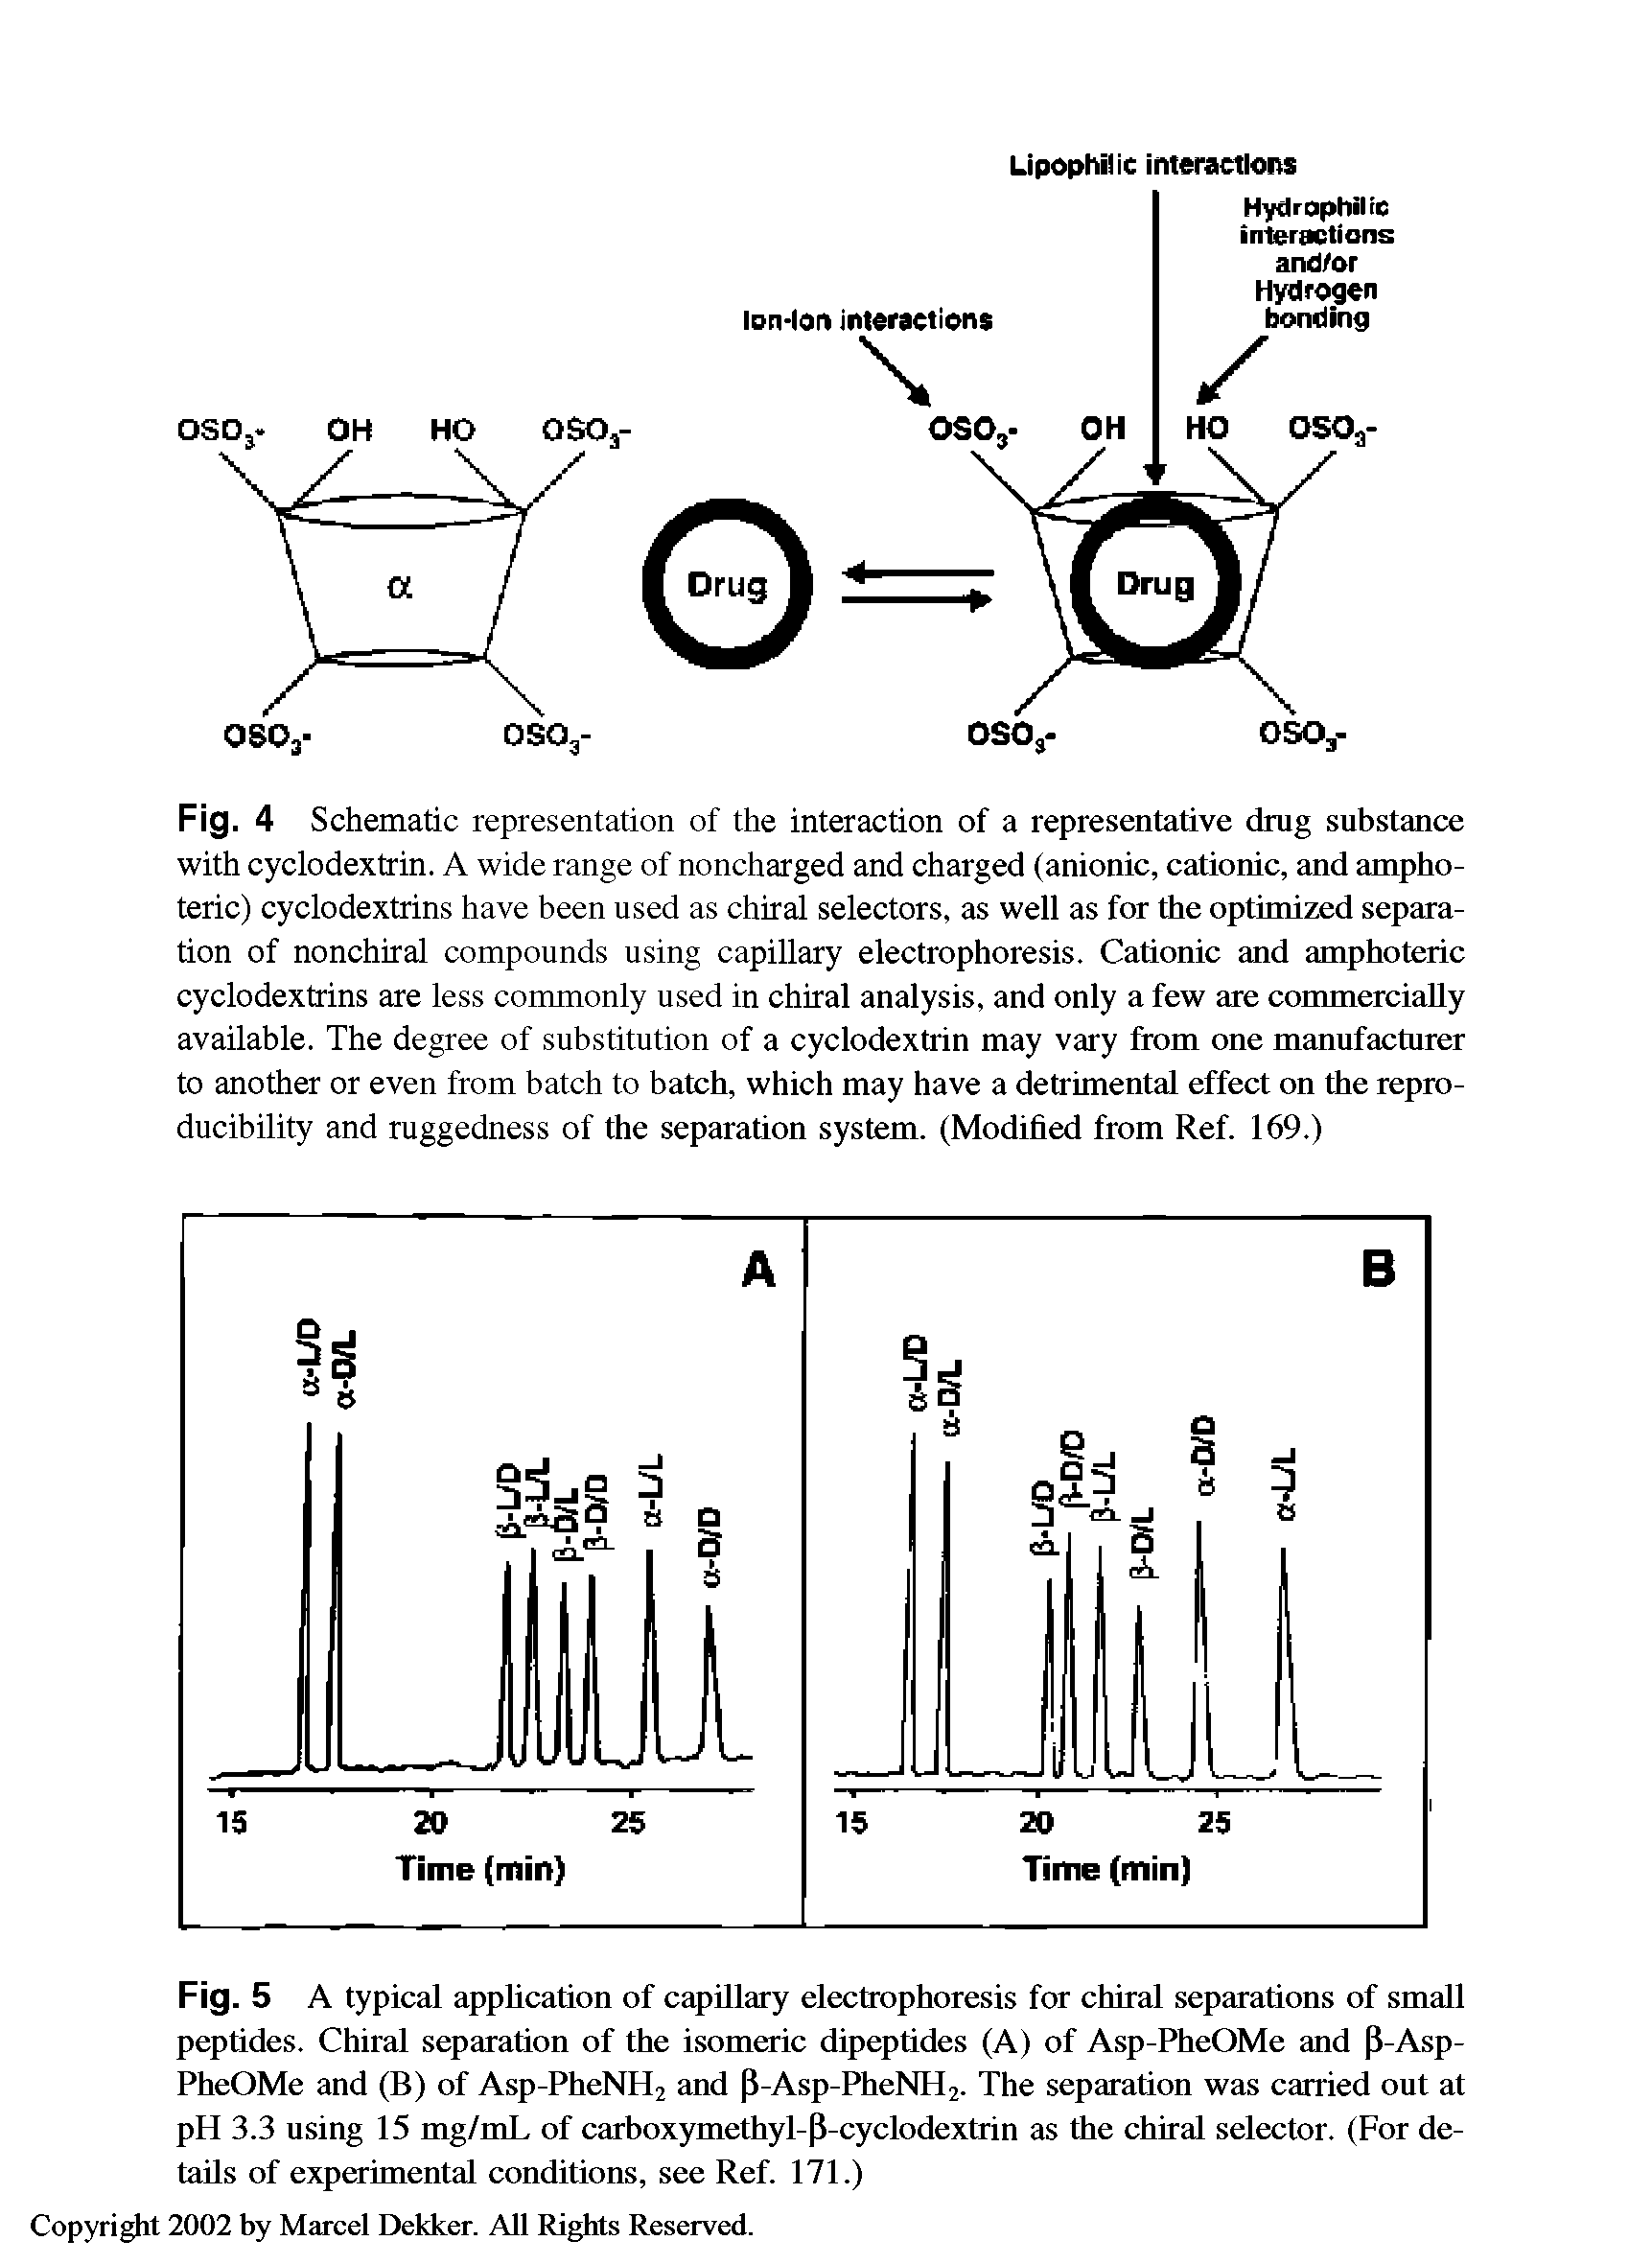 Fig. 4 Schematic representation of the interaction of a representative drug substance with cyclodextrin. A wide range of noncharged and charged (anionic, cationic, and amphoteric) cyclodextrins have been used as chiral selectors, as well as for the optimized separation of nonchiral compounds using capillary electrophoresis. Cationic and amphoteric cyclodextrins are less commonly used in chiral analysis, and only a few are commercially available. The degree of substitution of a cyclodextrin may vary from one manufacturer to another or even from batch to batch, which may have a detrimental effect on the reproducibility and ruggedness of the separation system. (Modified from Ref. 169.)...